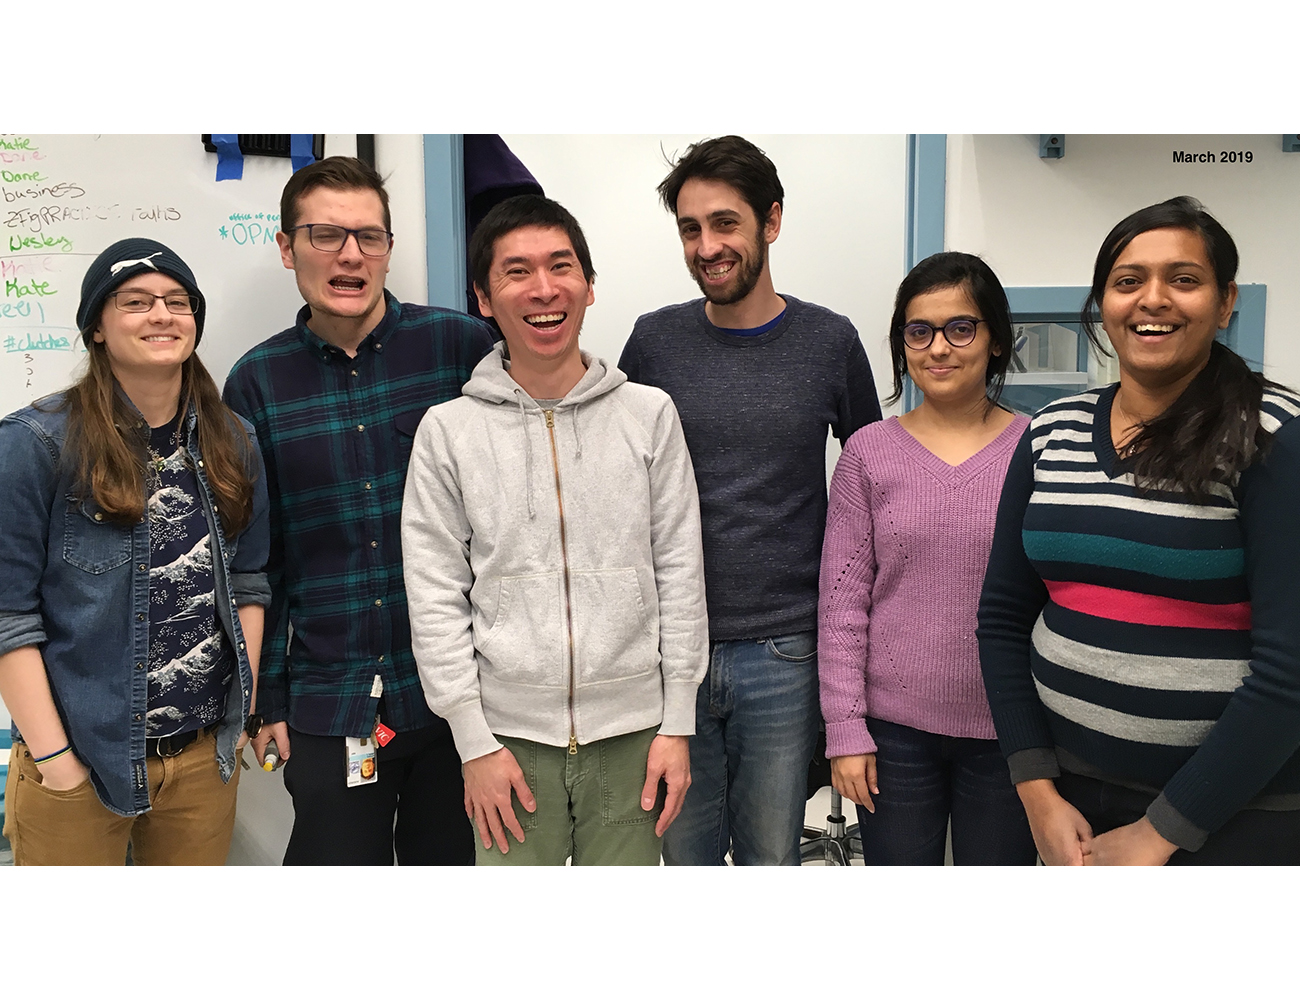 Photo of the lab members in March 2019